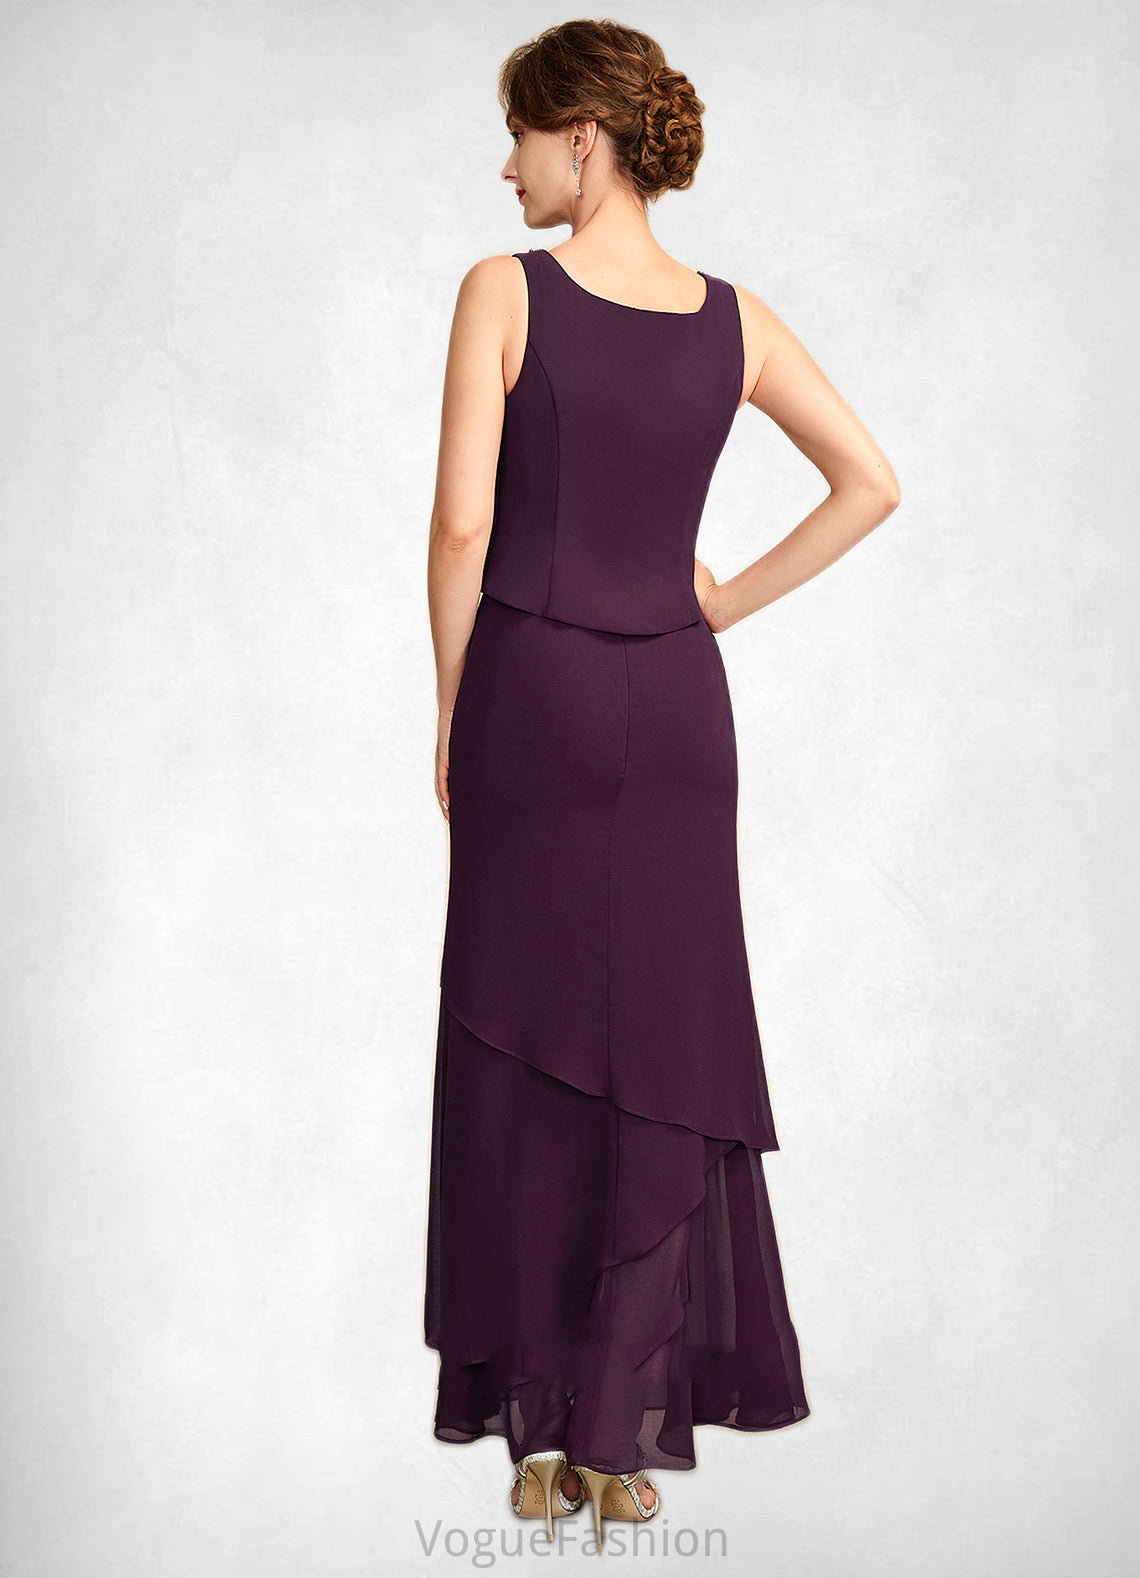 Bria Sheath/Column Scoop Neck Ankle-Length Chiffon Mother of the Bride Dress With Beading Sequins DK126P0015024